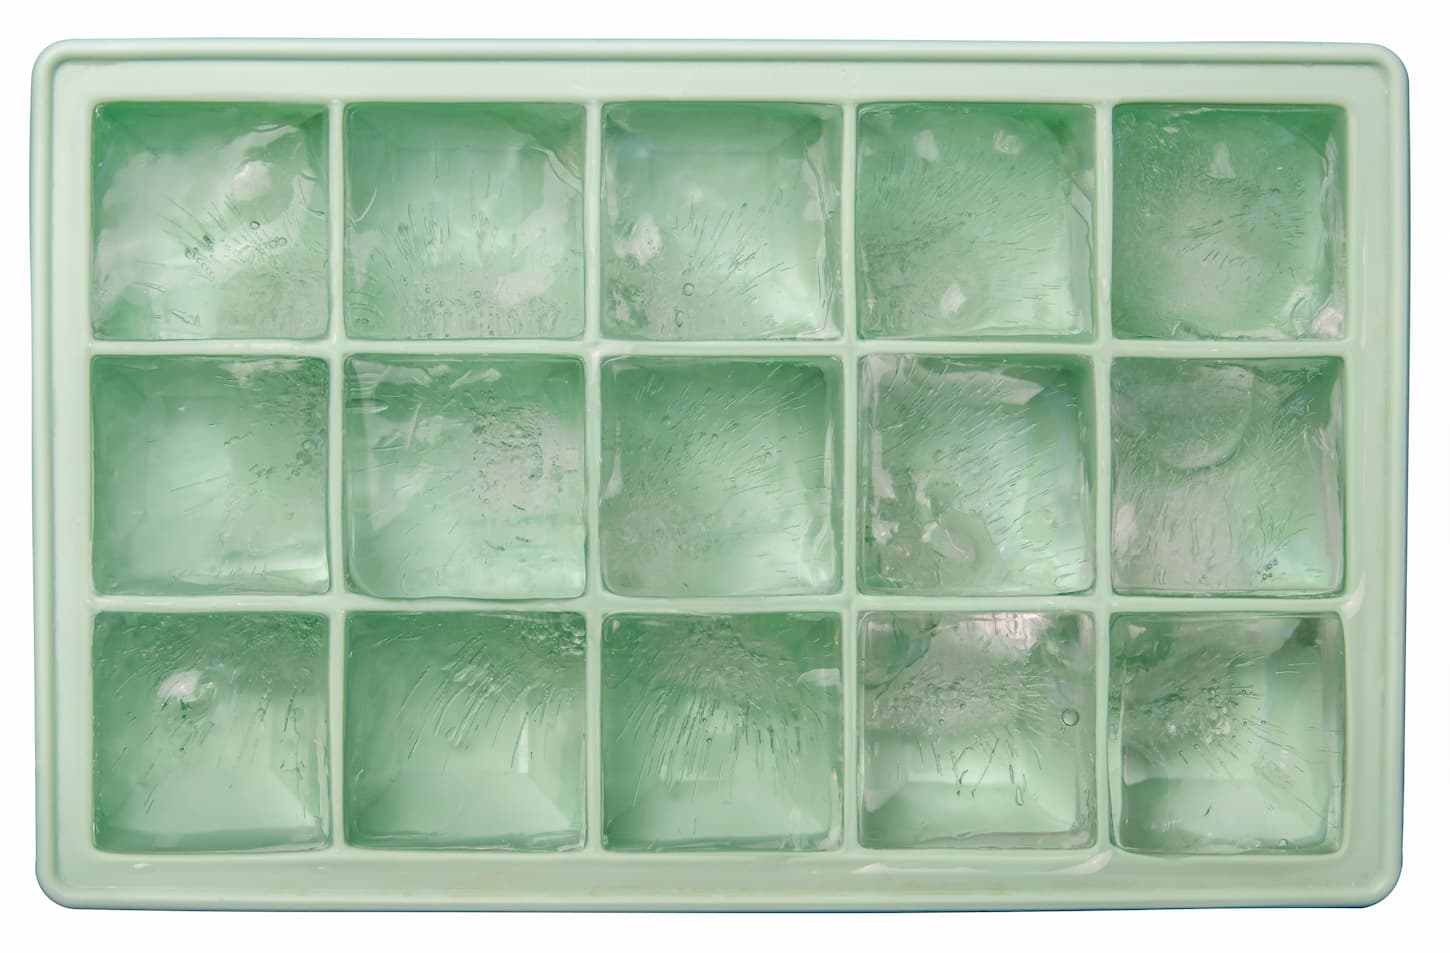 An image of an isolated ice tray containing ice cubes.